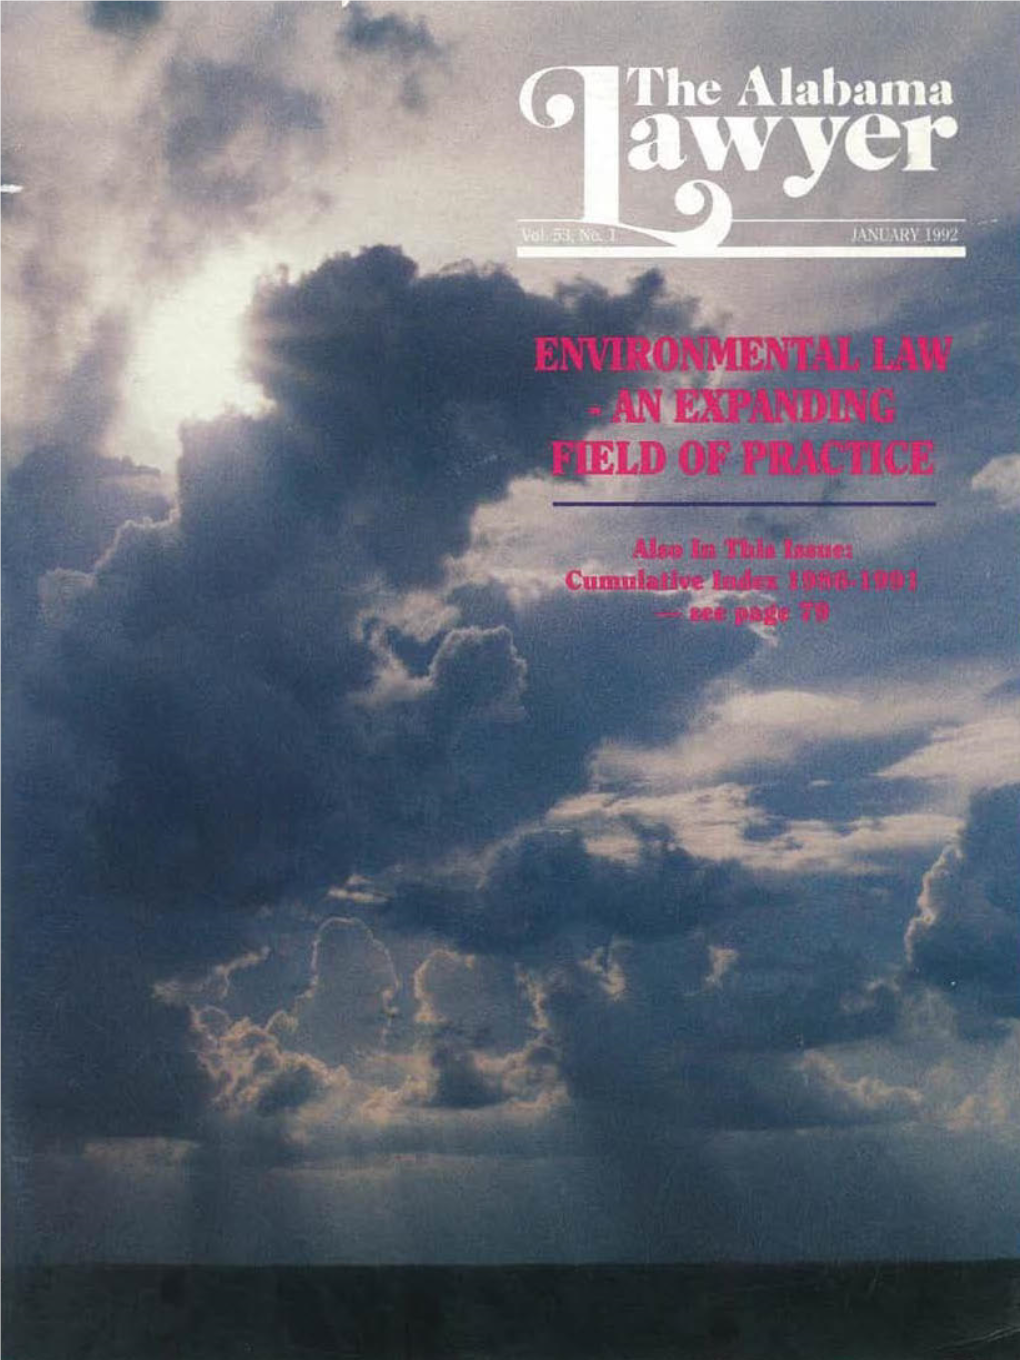 JANUARY1992 Volume53, Number1 Pvtmhed Mytn &Imesa Yoar (Tho Aevenchissue IS a